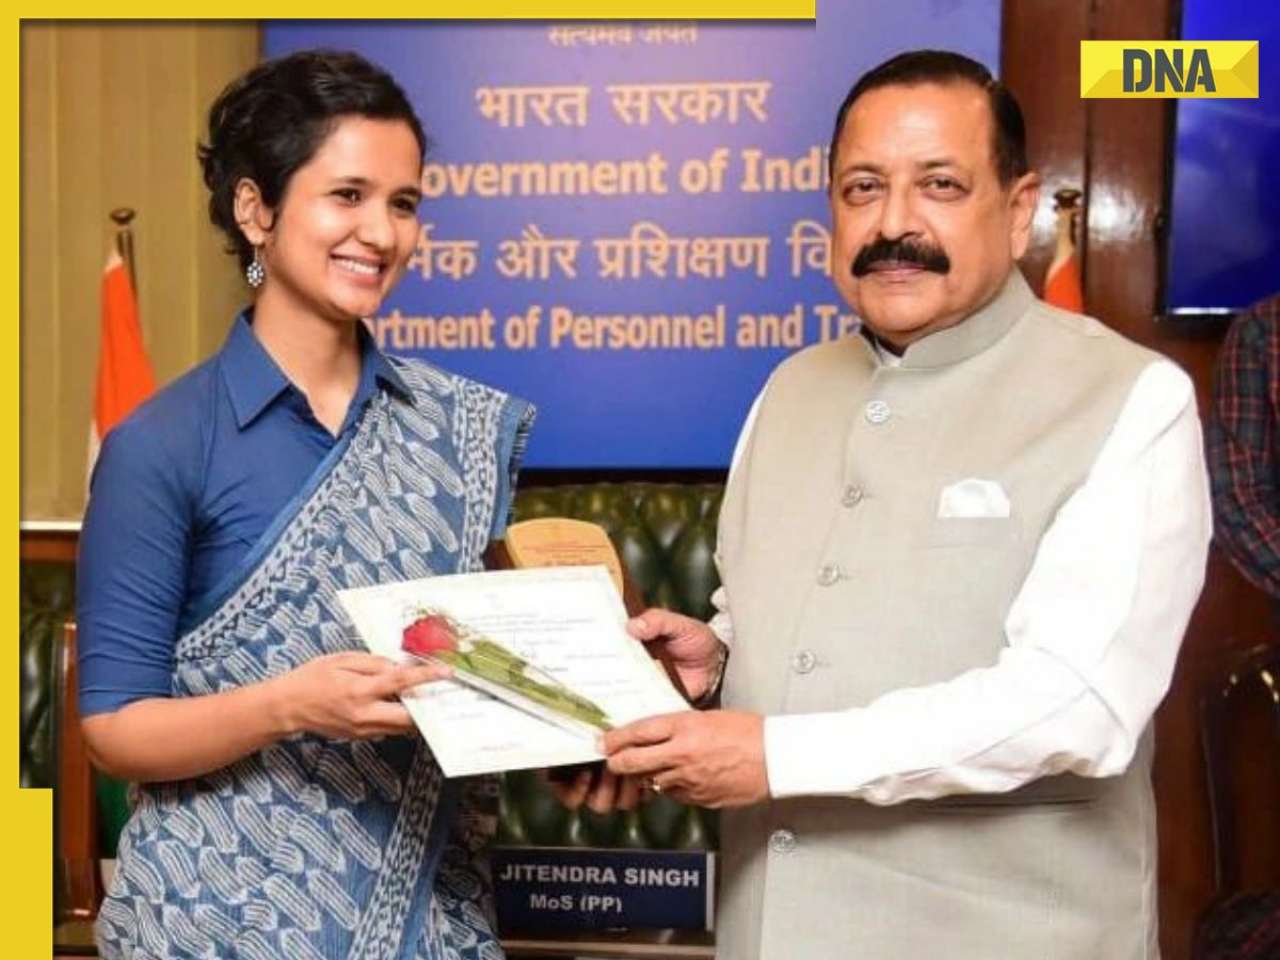 Meet IAS officer who failed in UPSC exam with one mark, later cracked it with AIR...